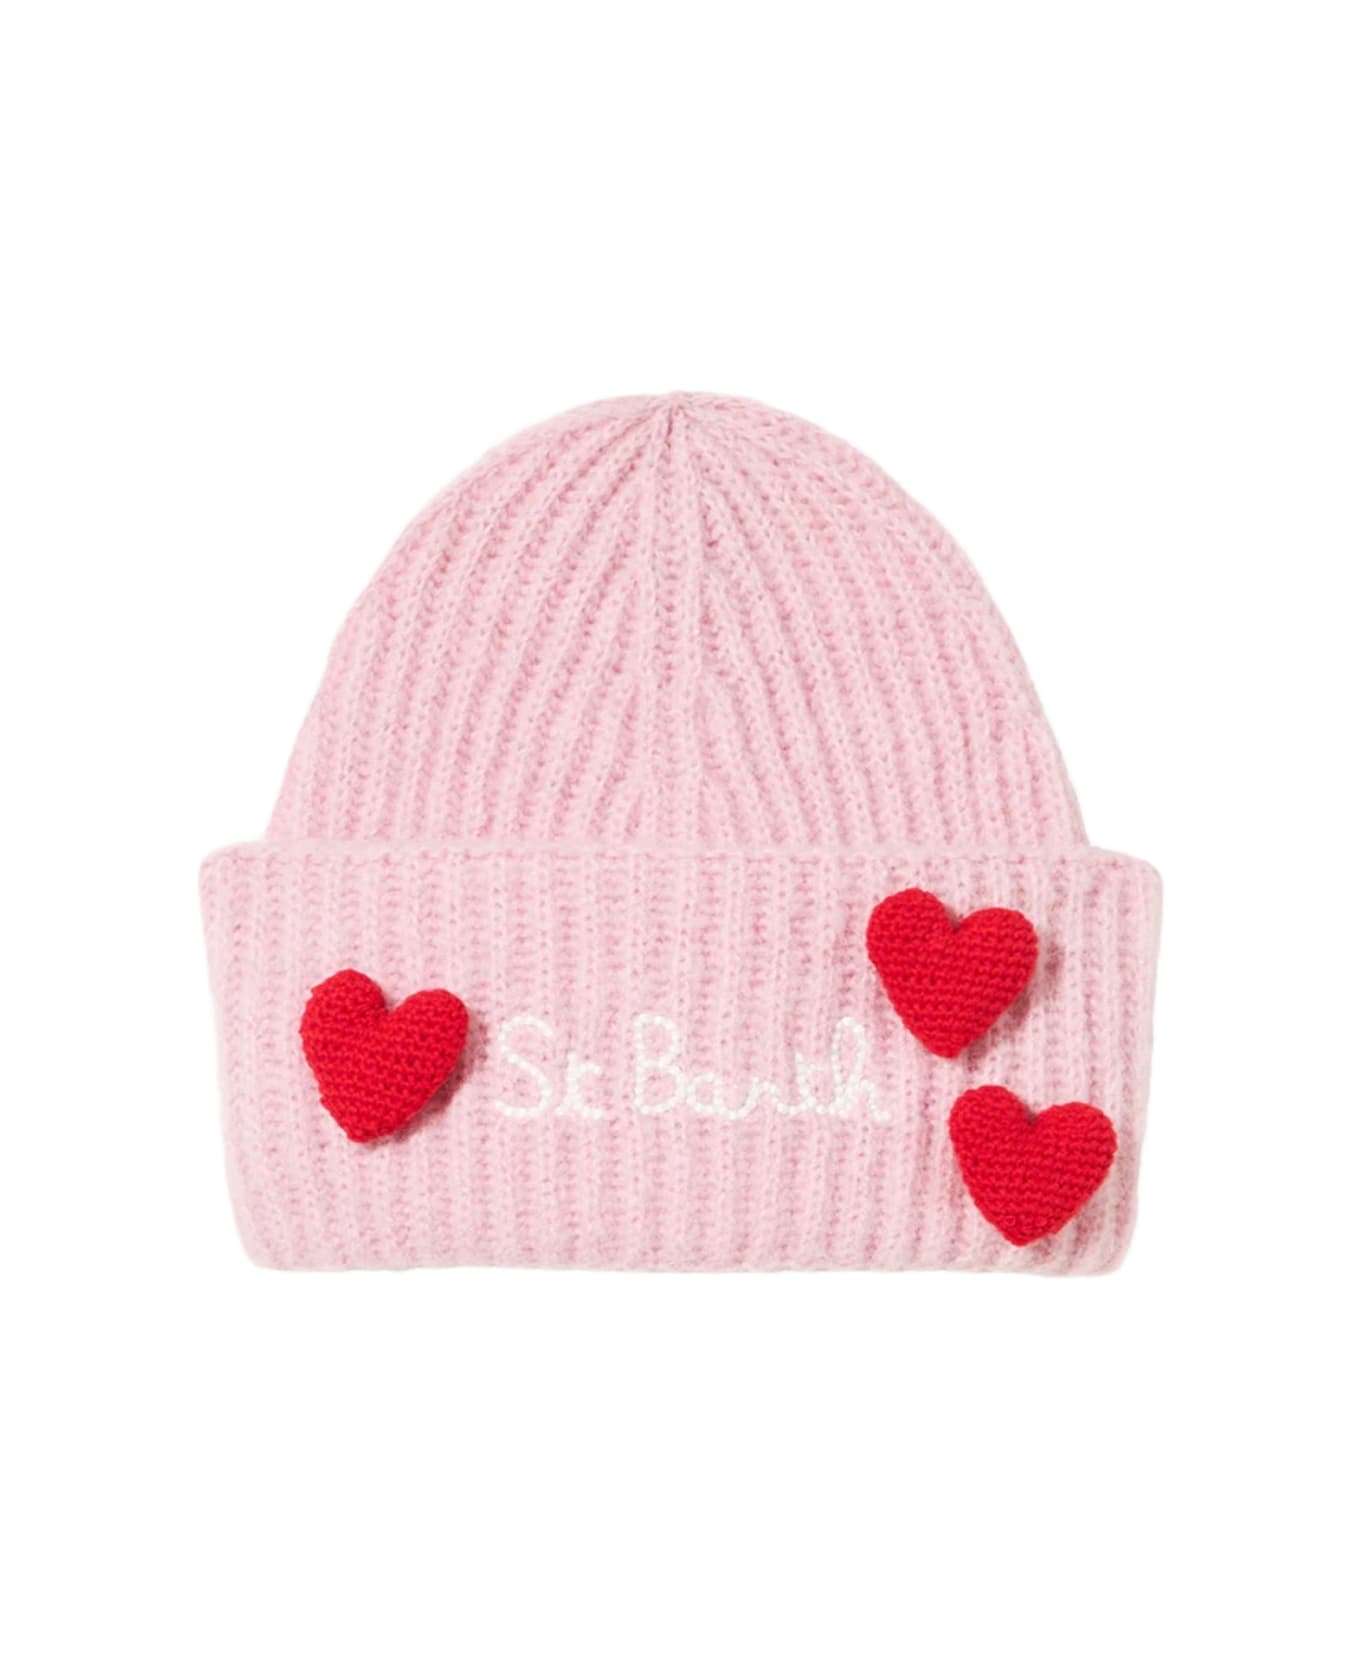 MC2 Saint Barth Woman Brushed And Ultra Soft Beanie With Hearts Appliqués - PINK